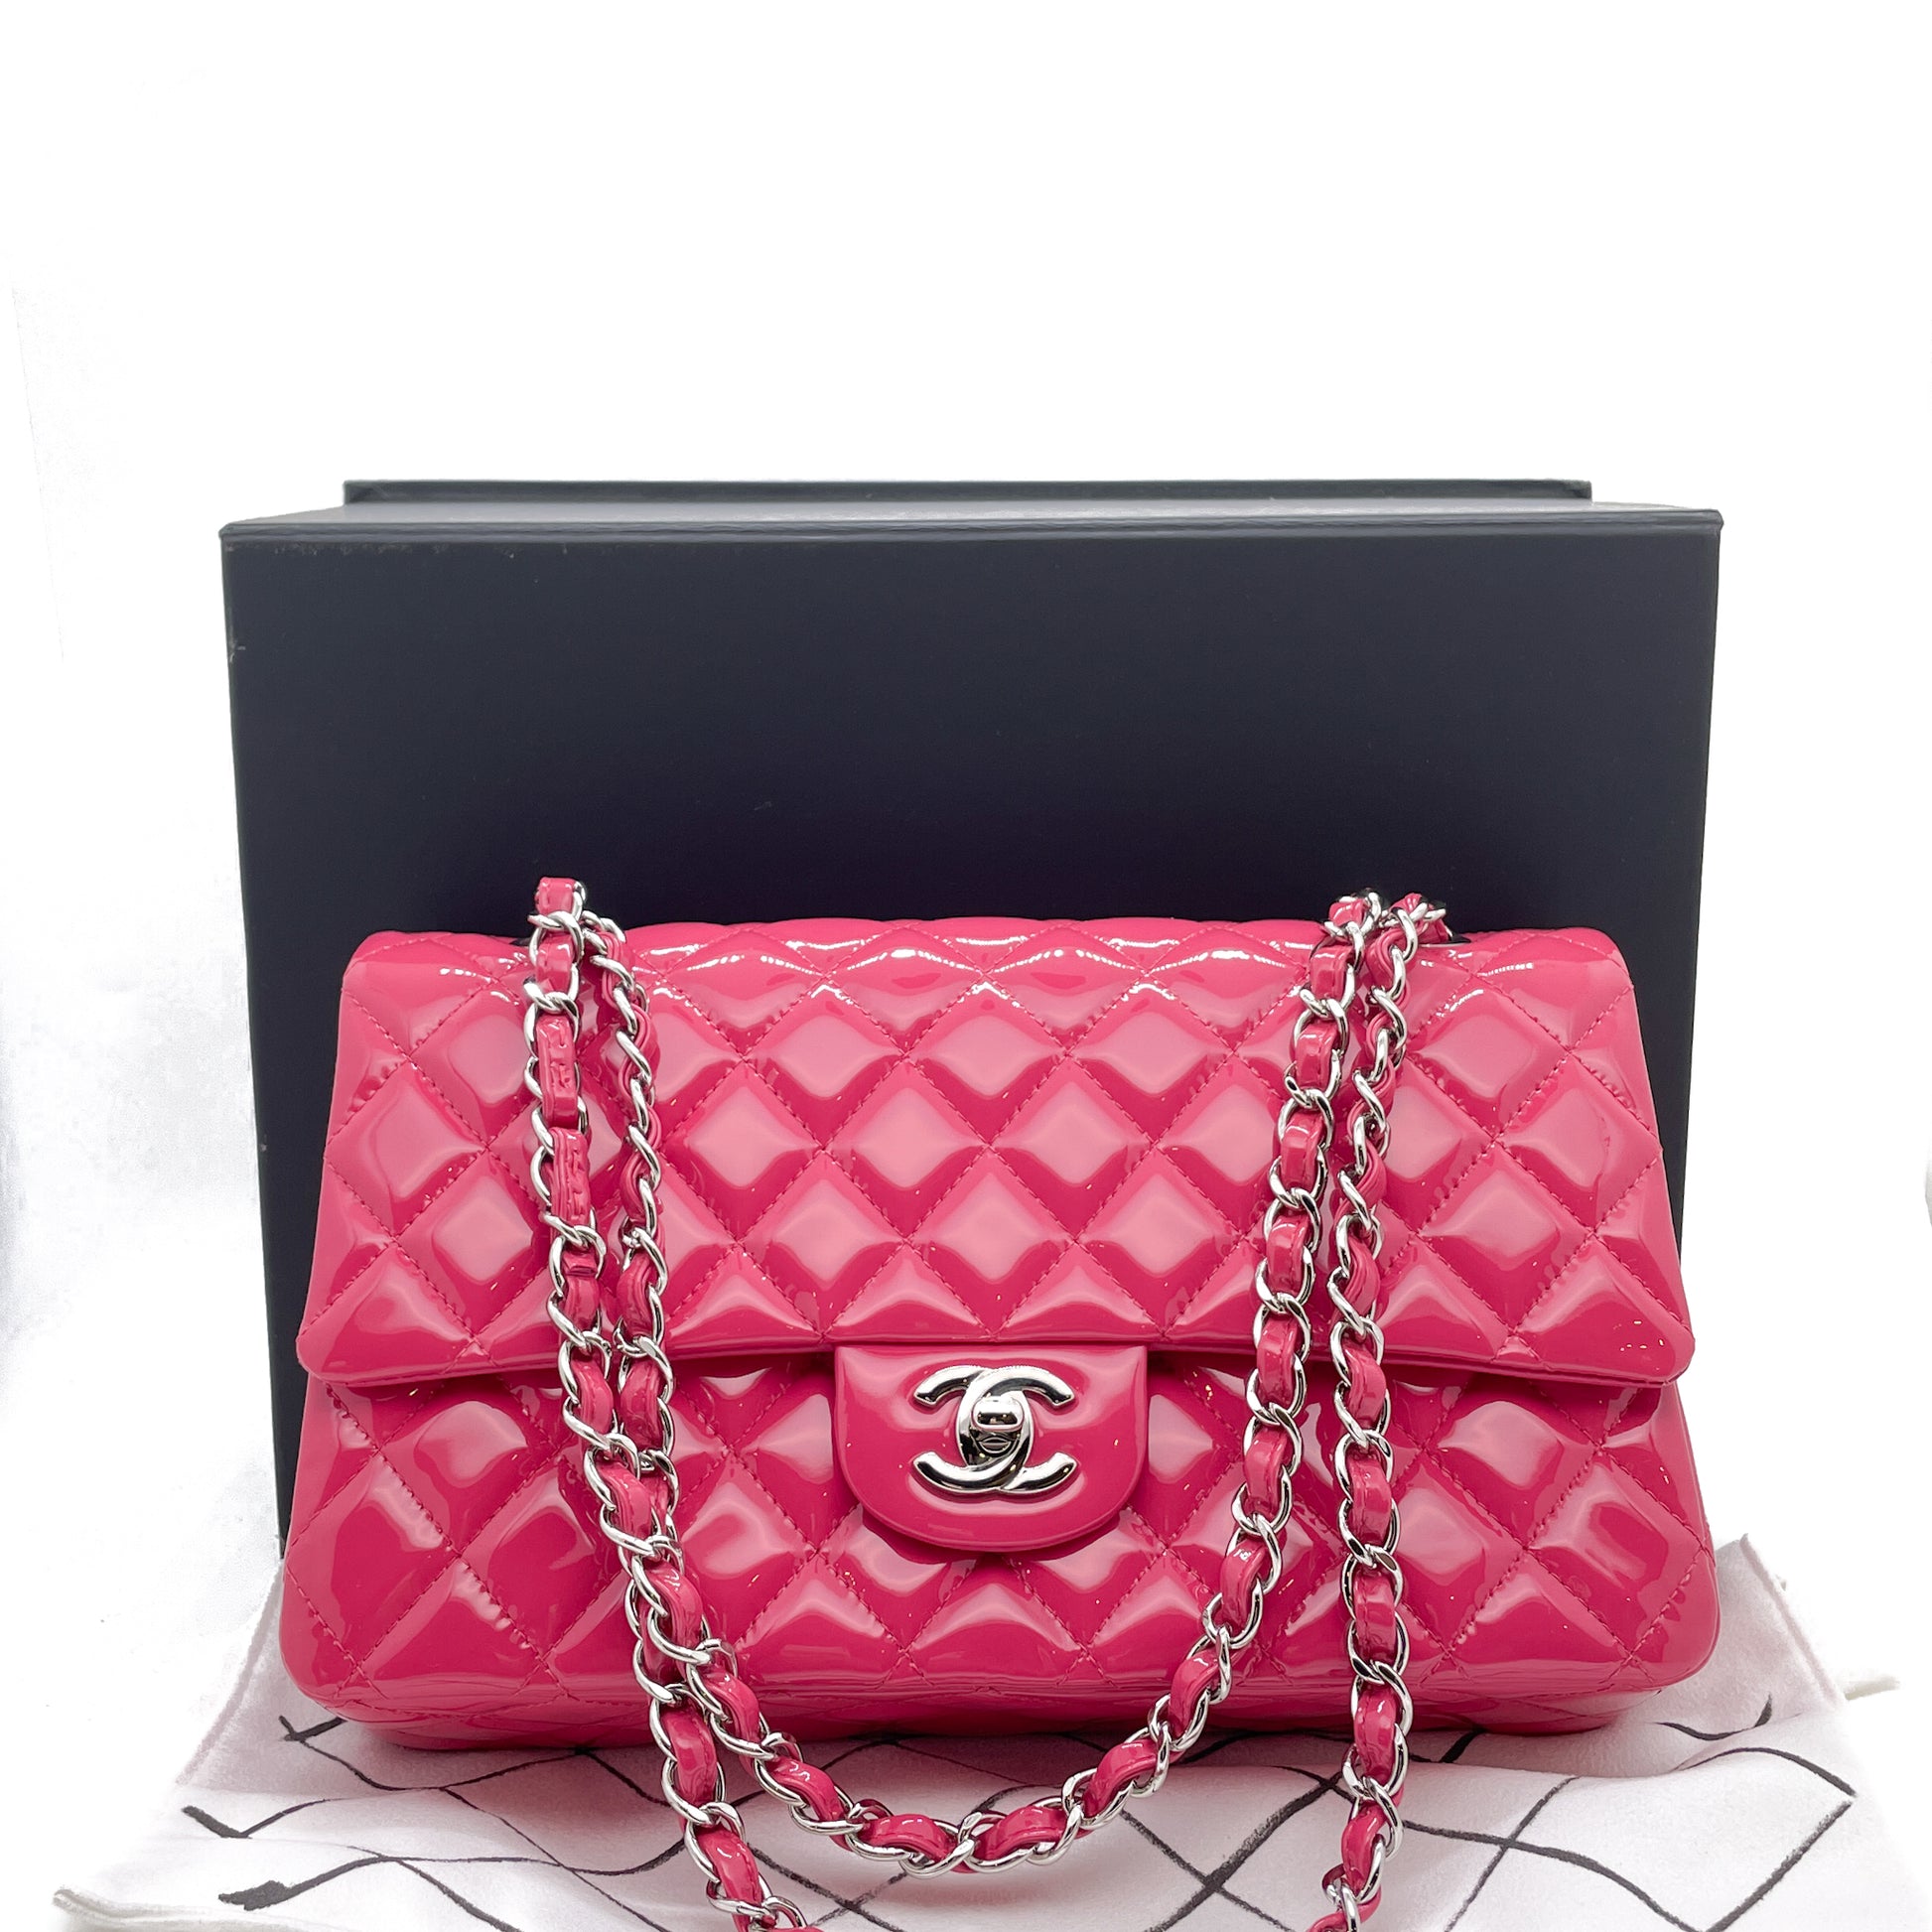 Chanel - Authenticated Timeless/Classique Handbag - Patent Leather Pink Plain for Women, Good Condition